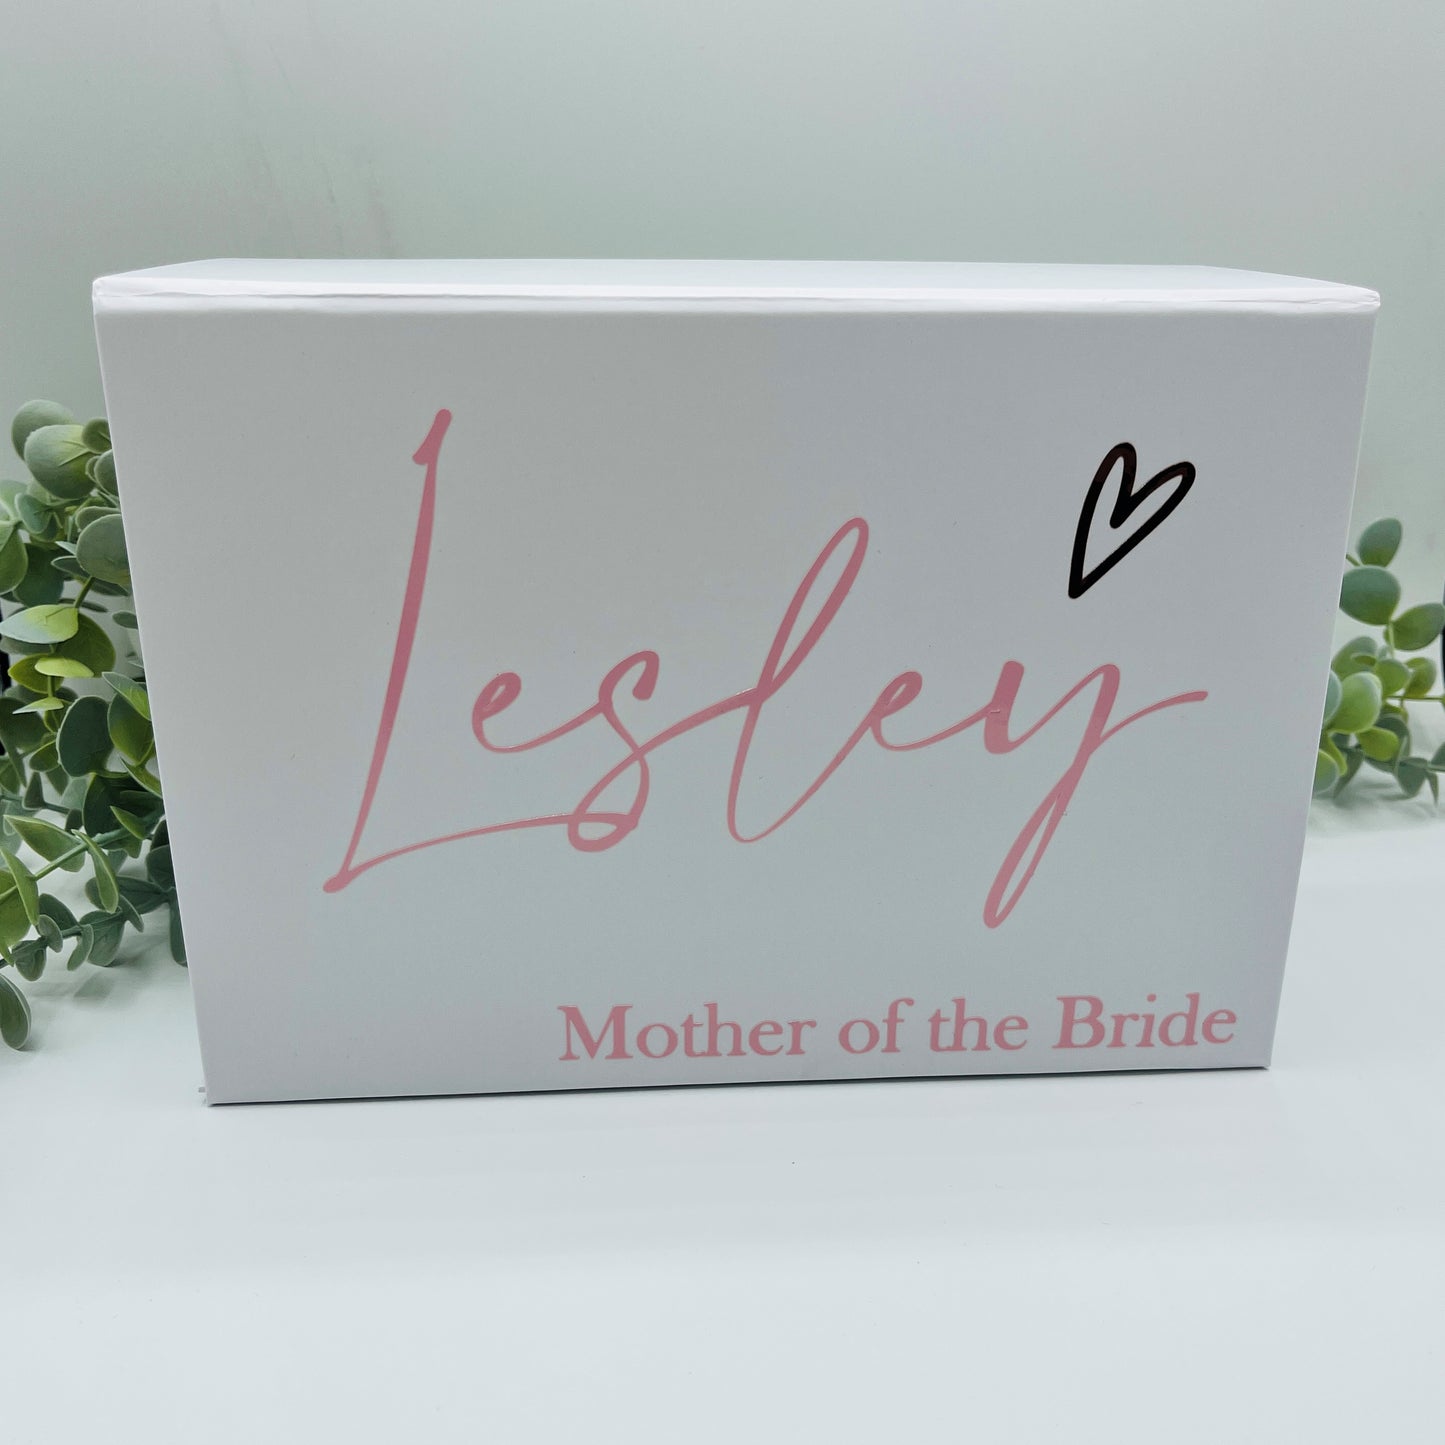 Mother of the Bride, Mother of the Groom Gifts, Luxury Hamper for Her, Wedding day gifts